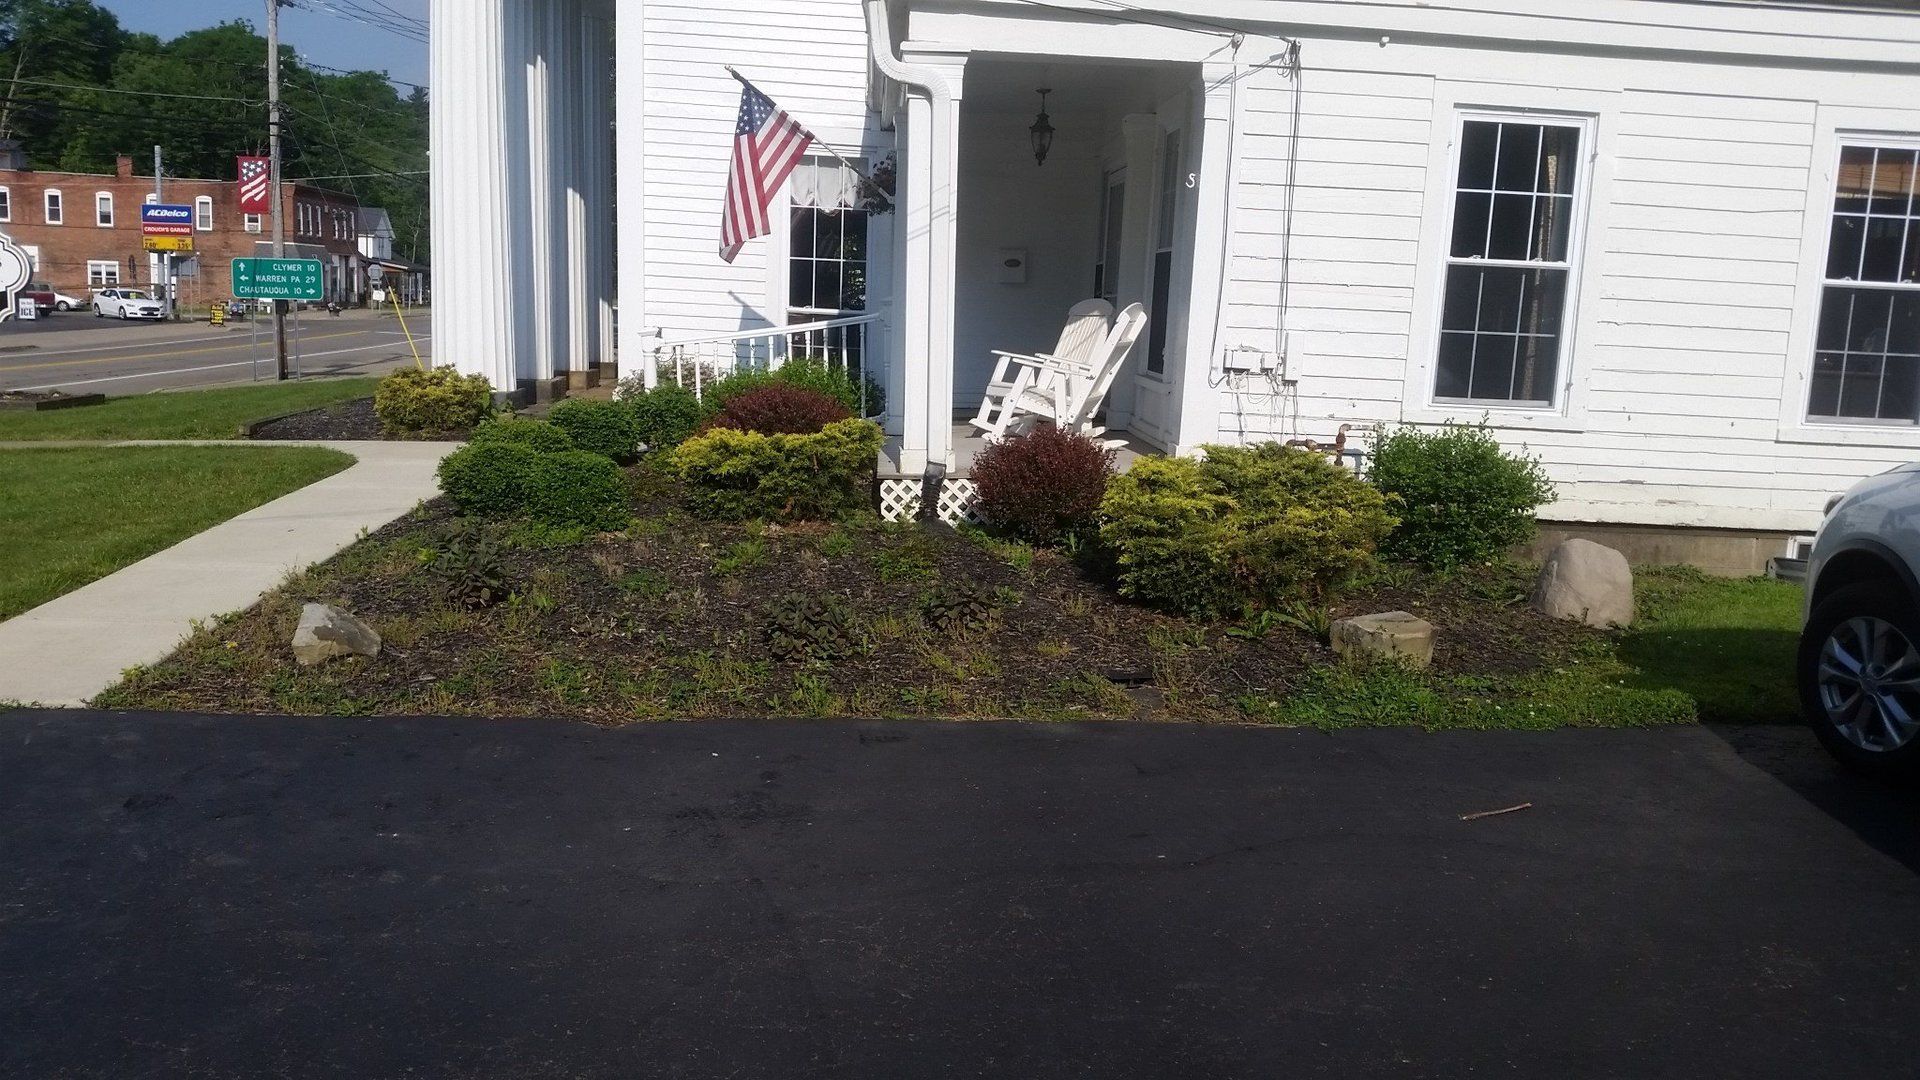 shrubs in landscaping in front of business